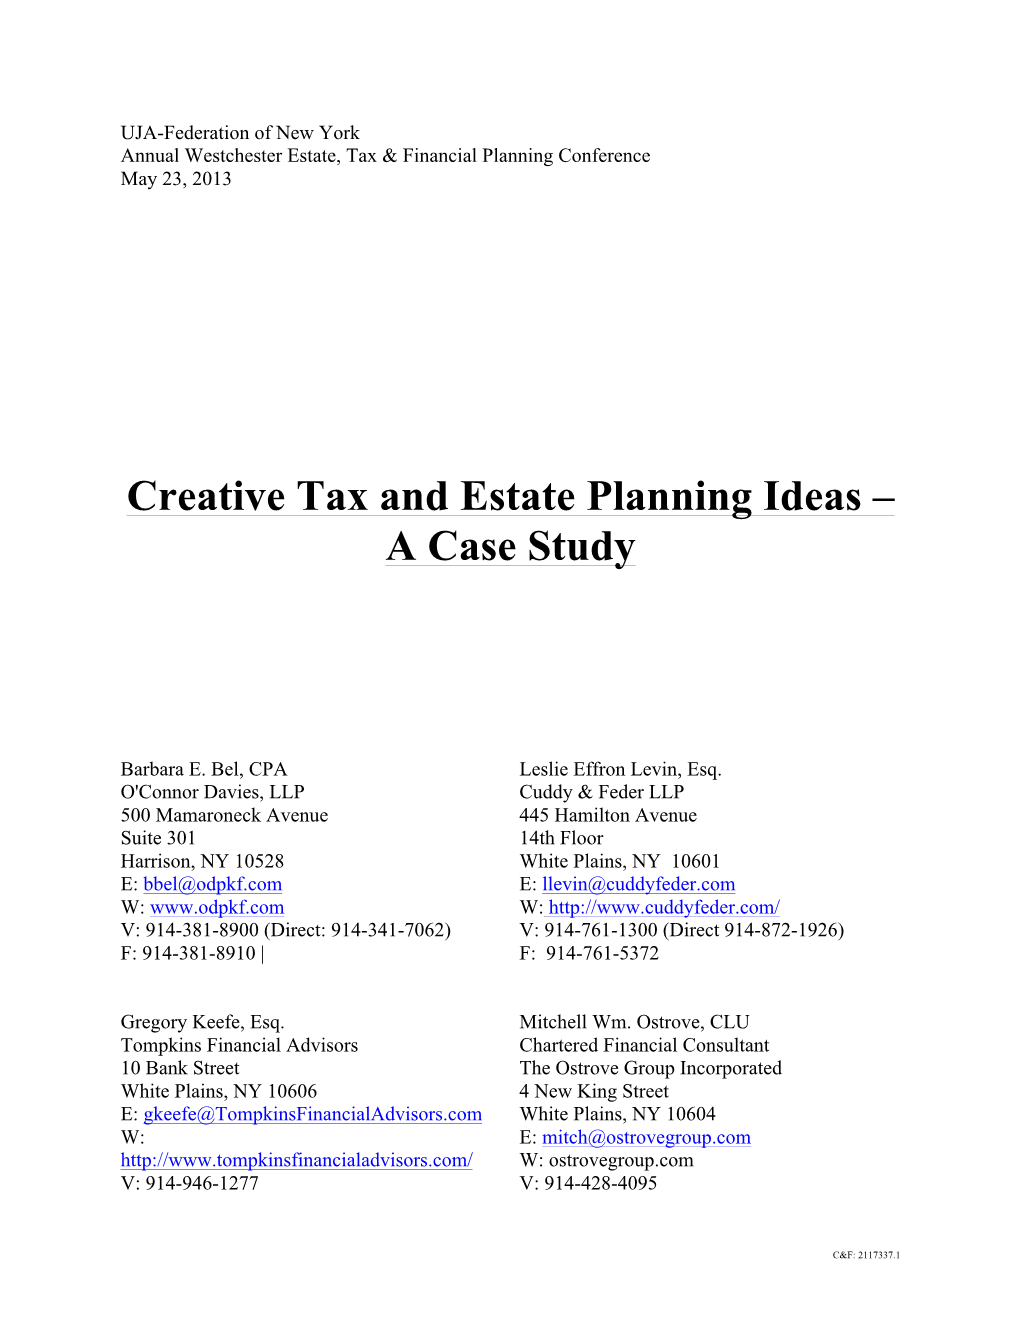 Creative Tax and Estate Planning Ideas – a Case Study